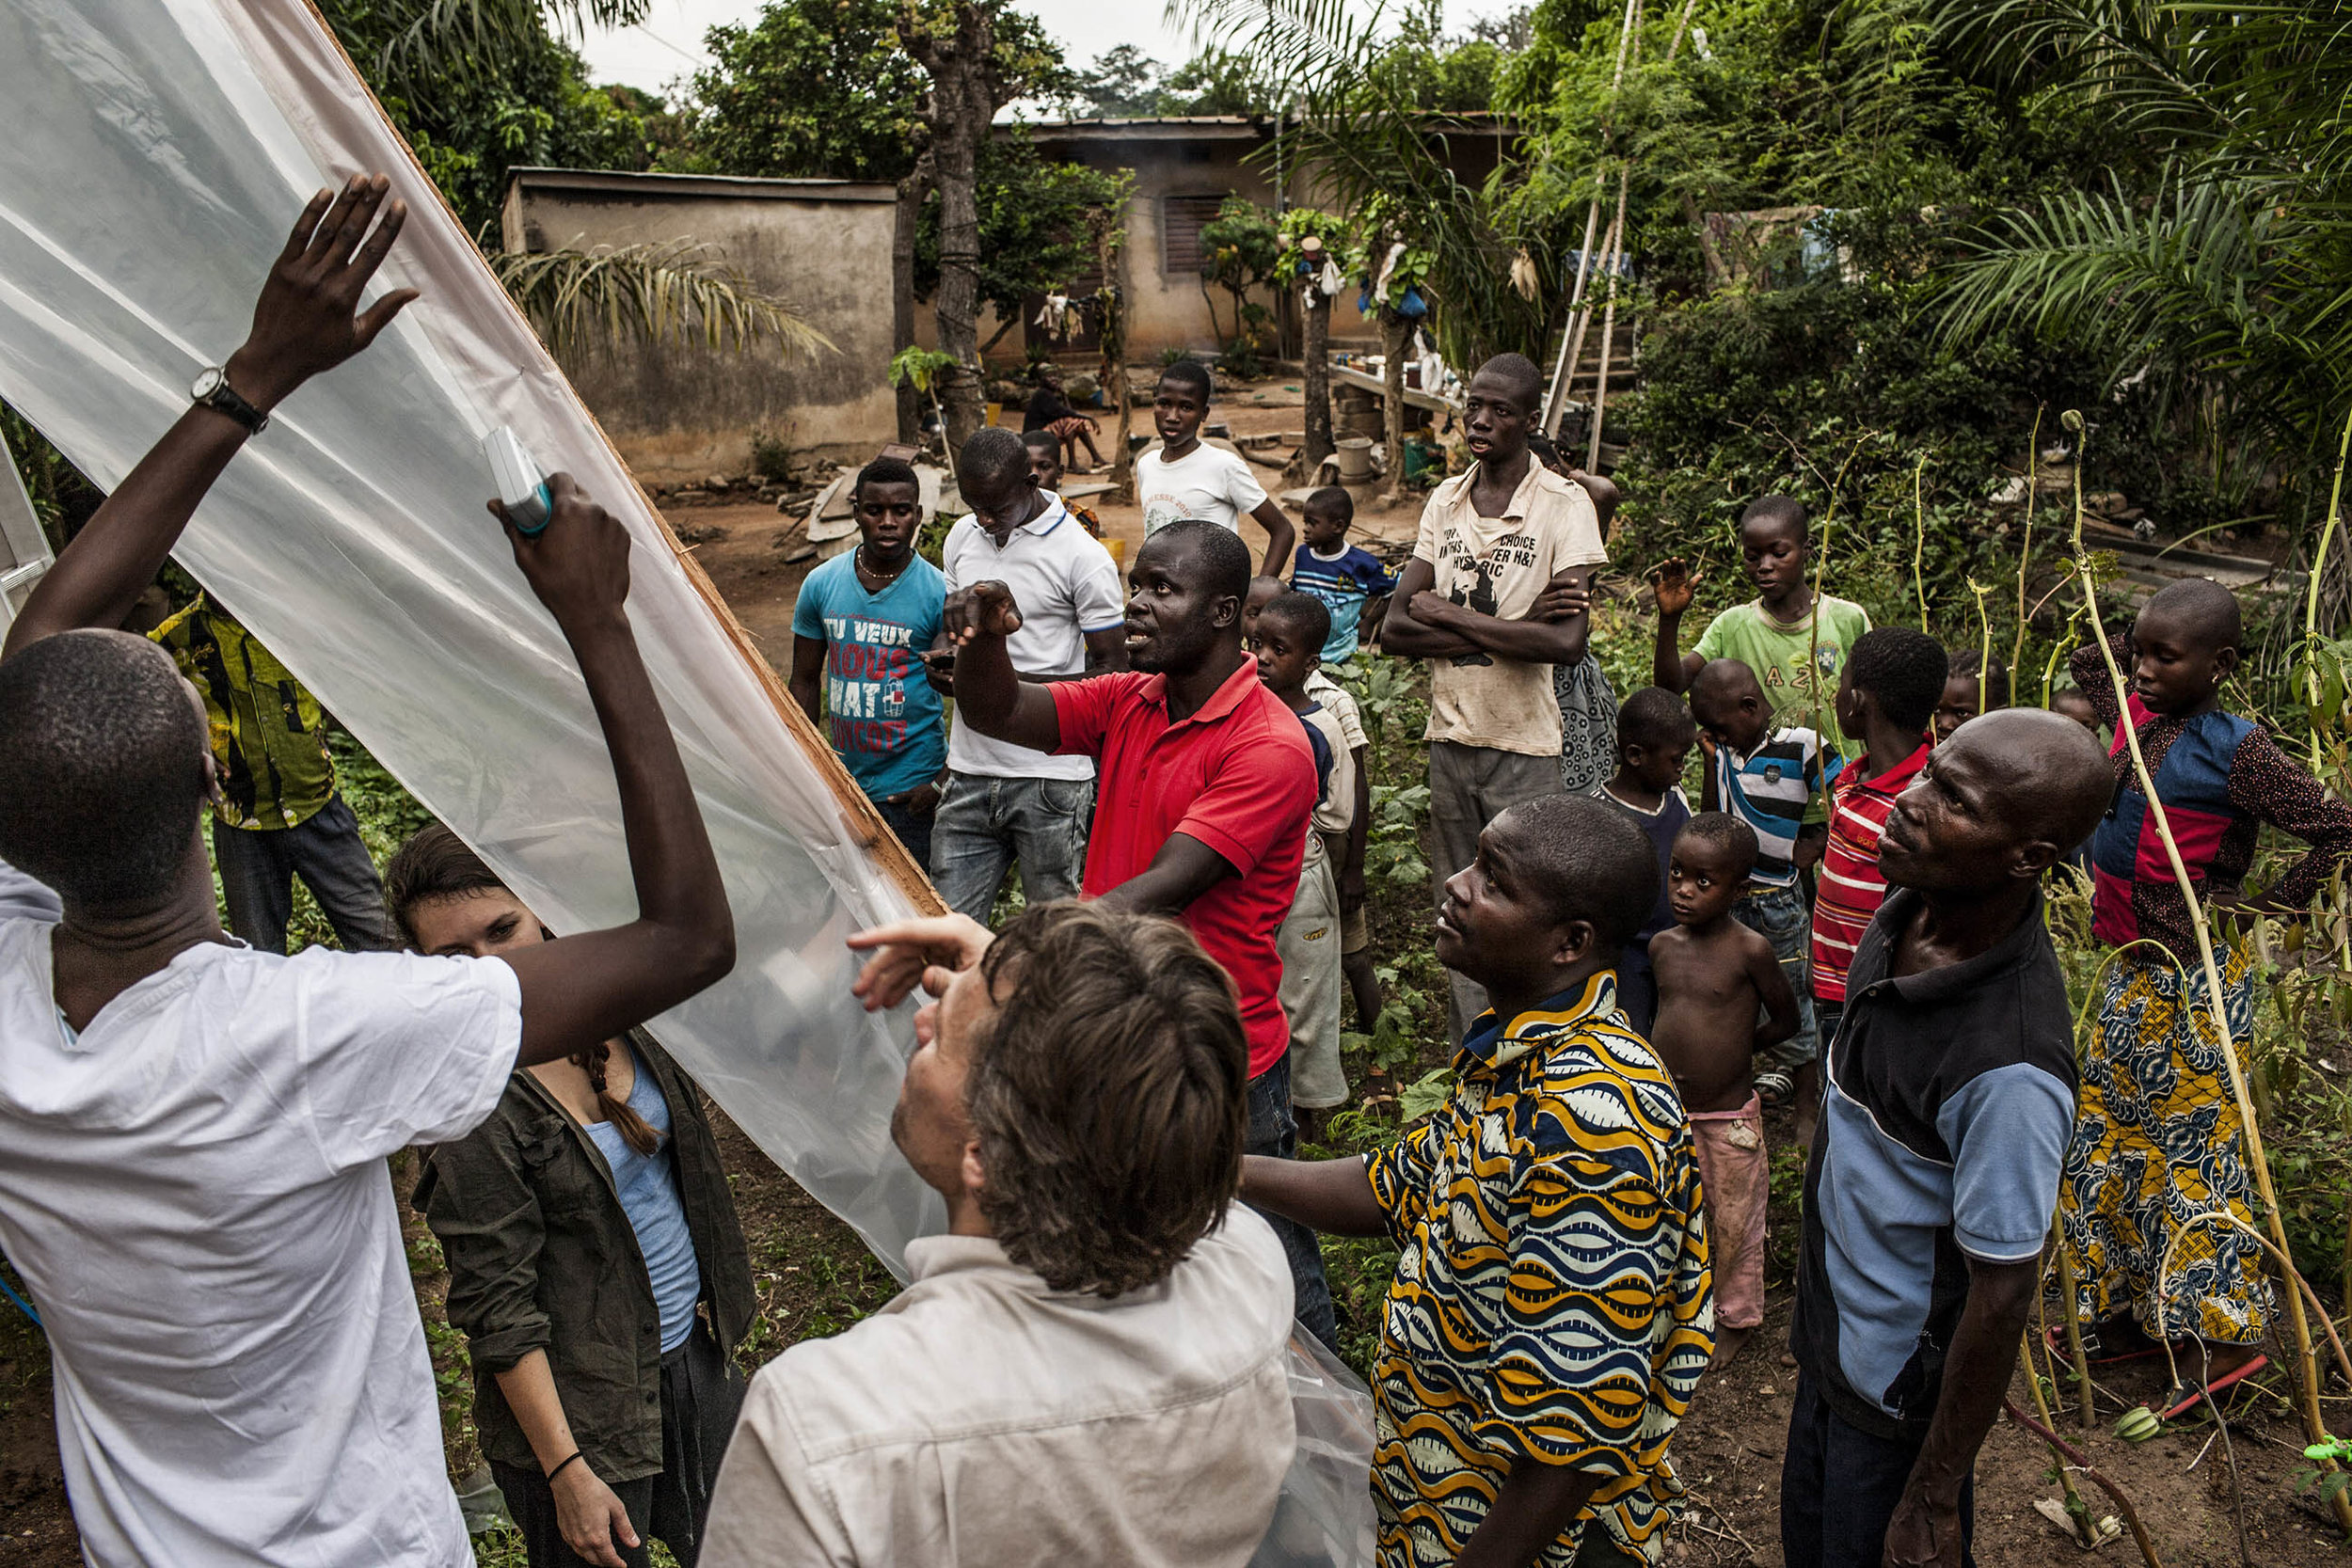  Dr. Fabian Leendertz (center foreground), Kouadio Leonce (left)  Krou Hermann Assemien (center in red shirt), Dede Yapo Desire (right center foreground) and Diambra Yapo Innocent (far right foreground) construct the bat-trapping apparatus in the vil